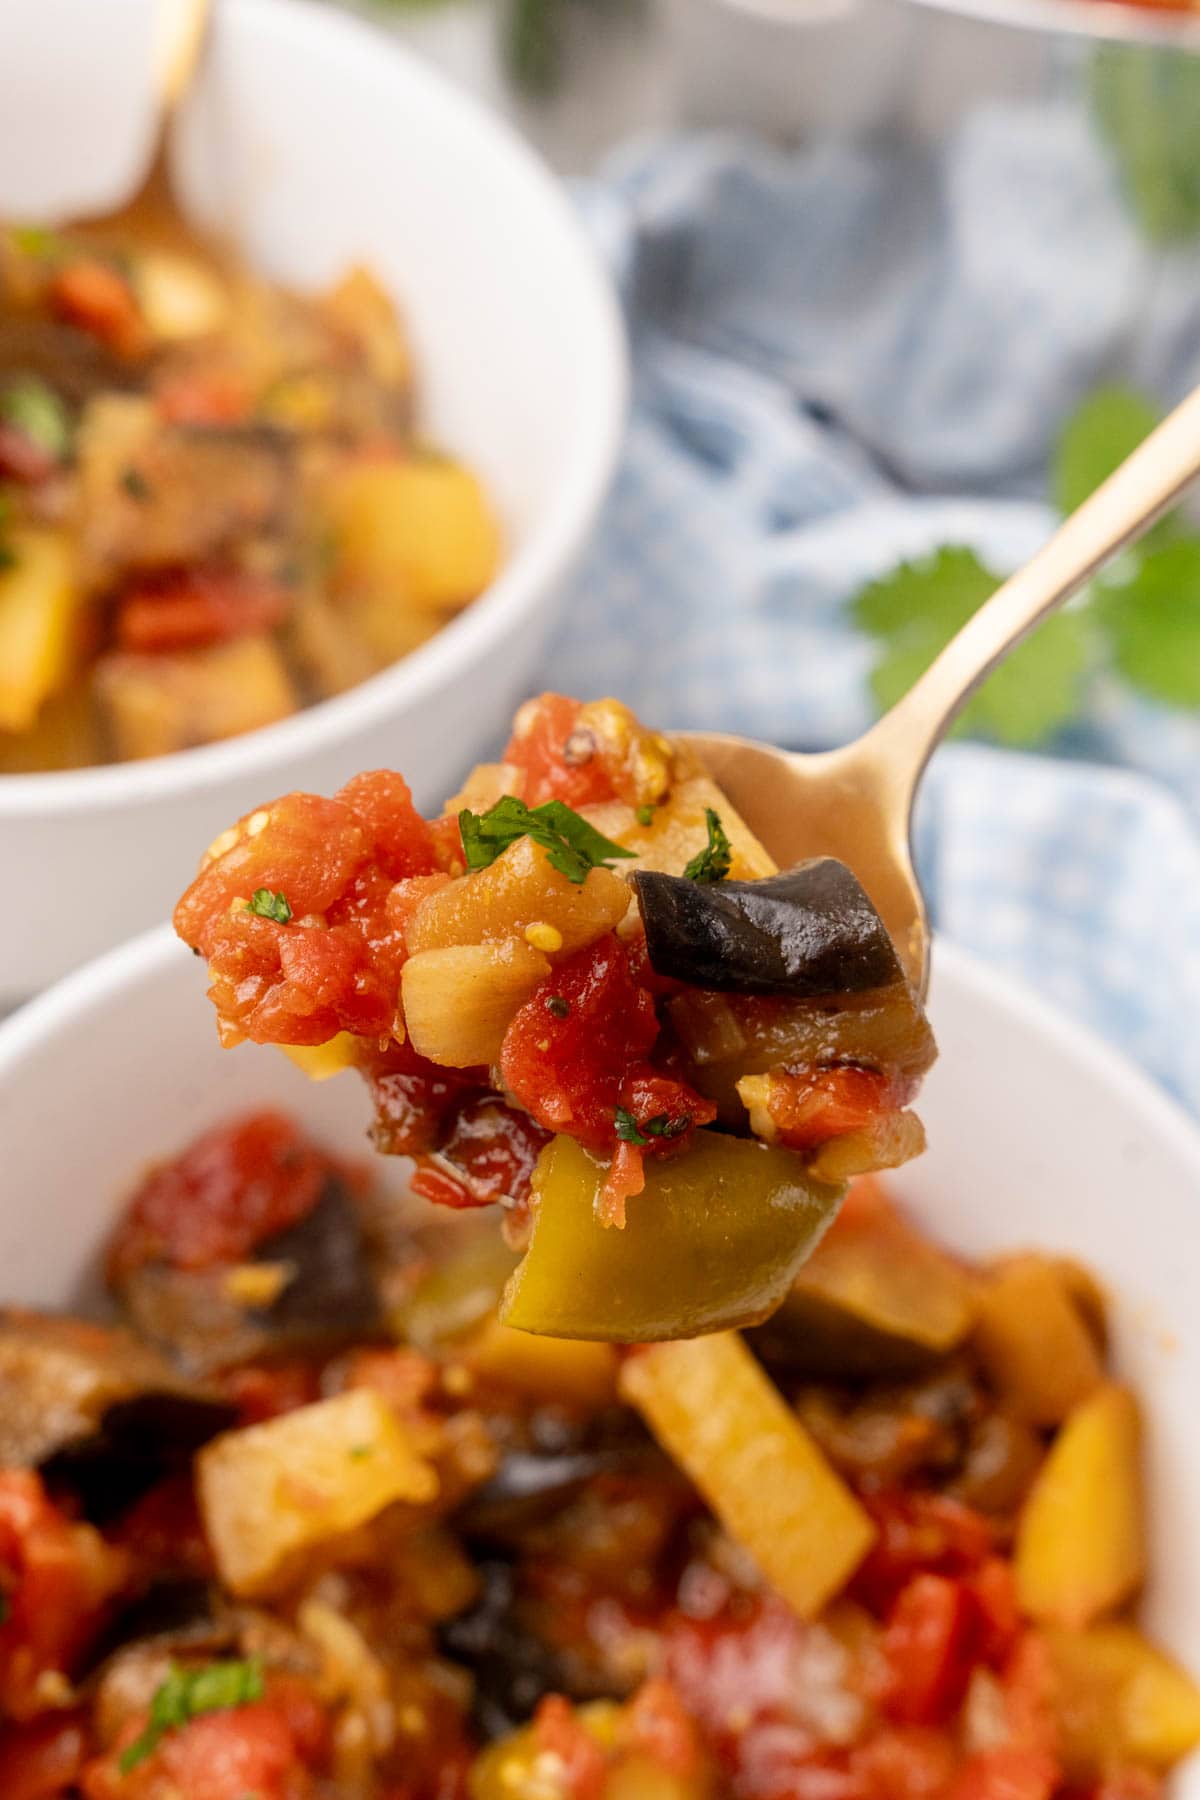 Spoonful of Moroccan eggplant stew held over bowl of stew